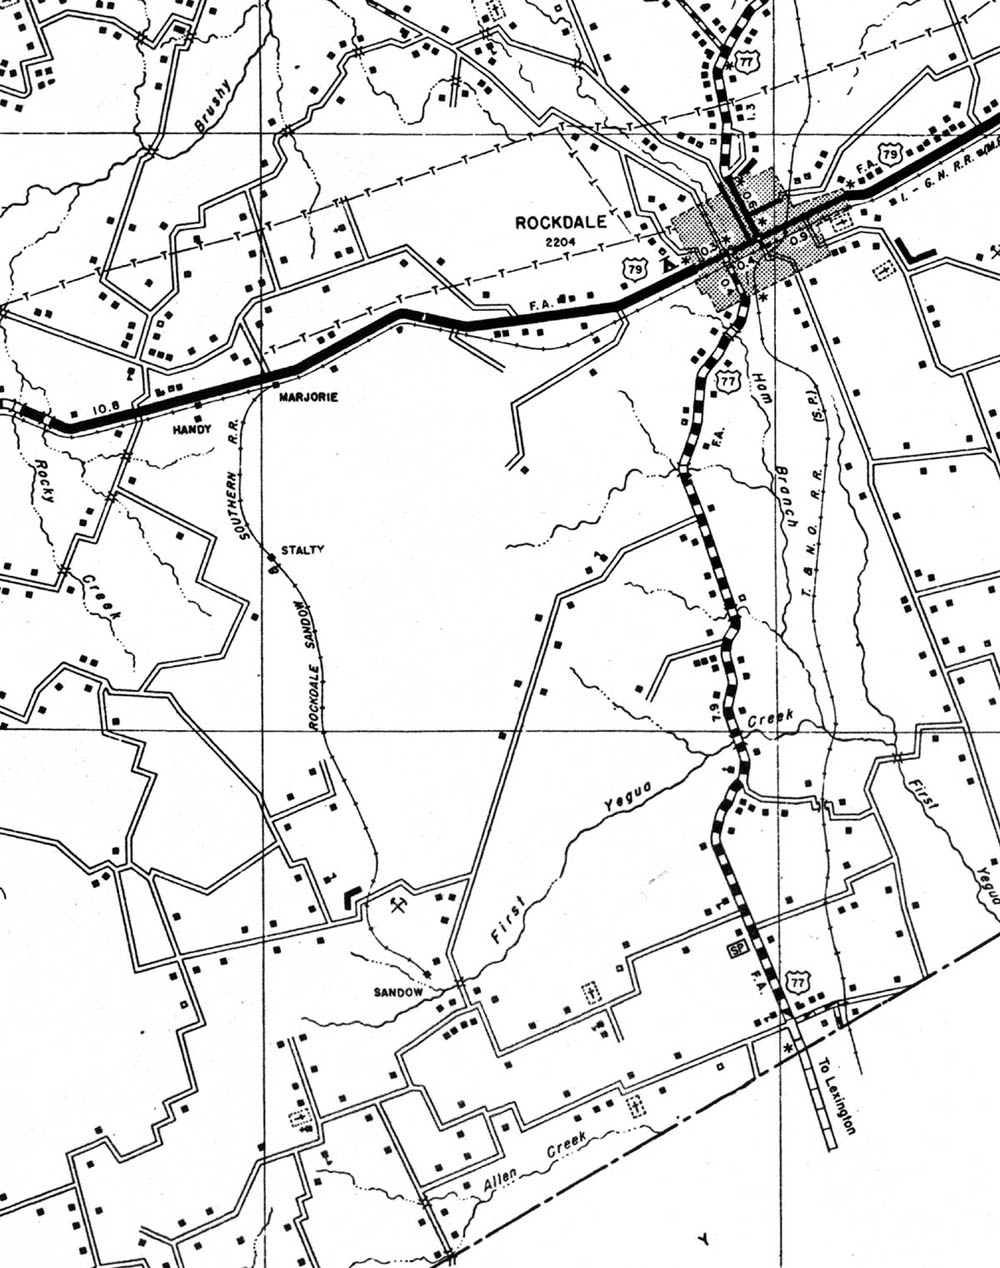 Rockdale, Sandow & Southern Railway Company (Tex.), Map Showing Route in 1936.